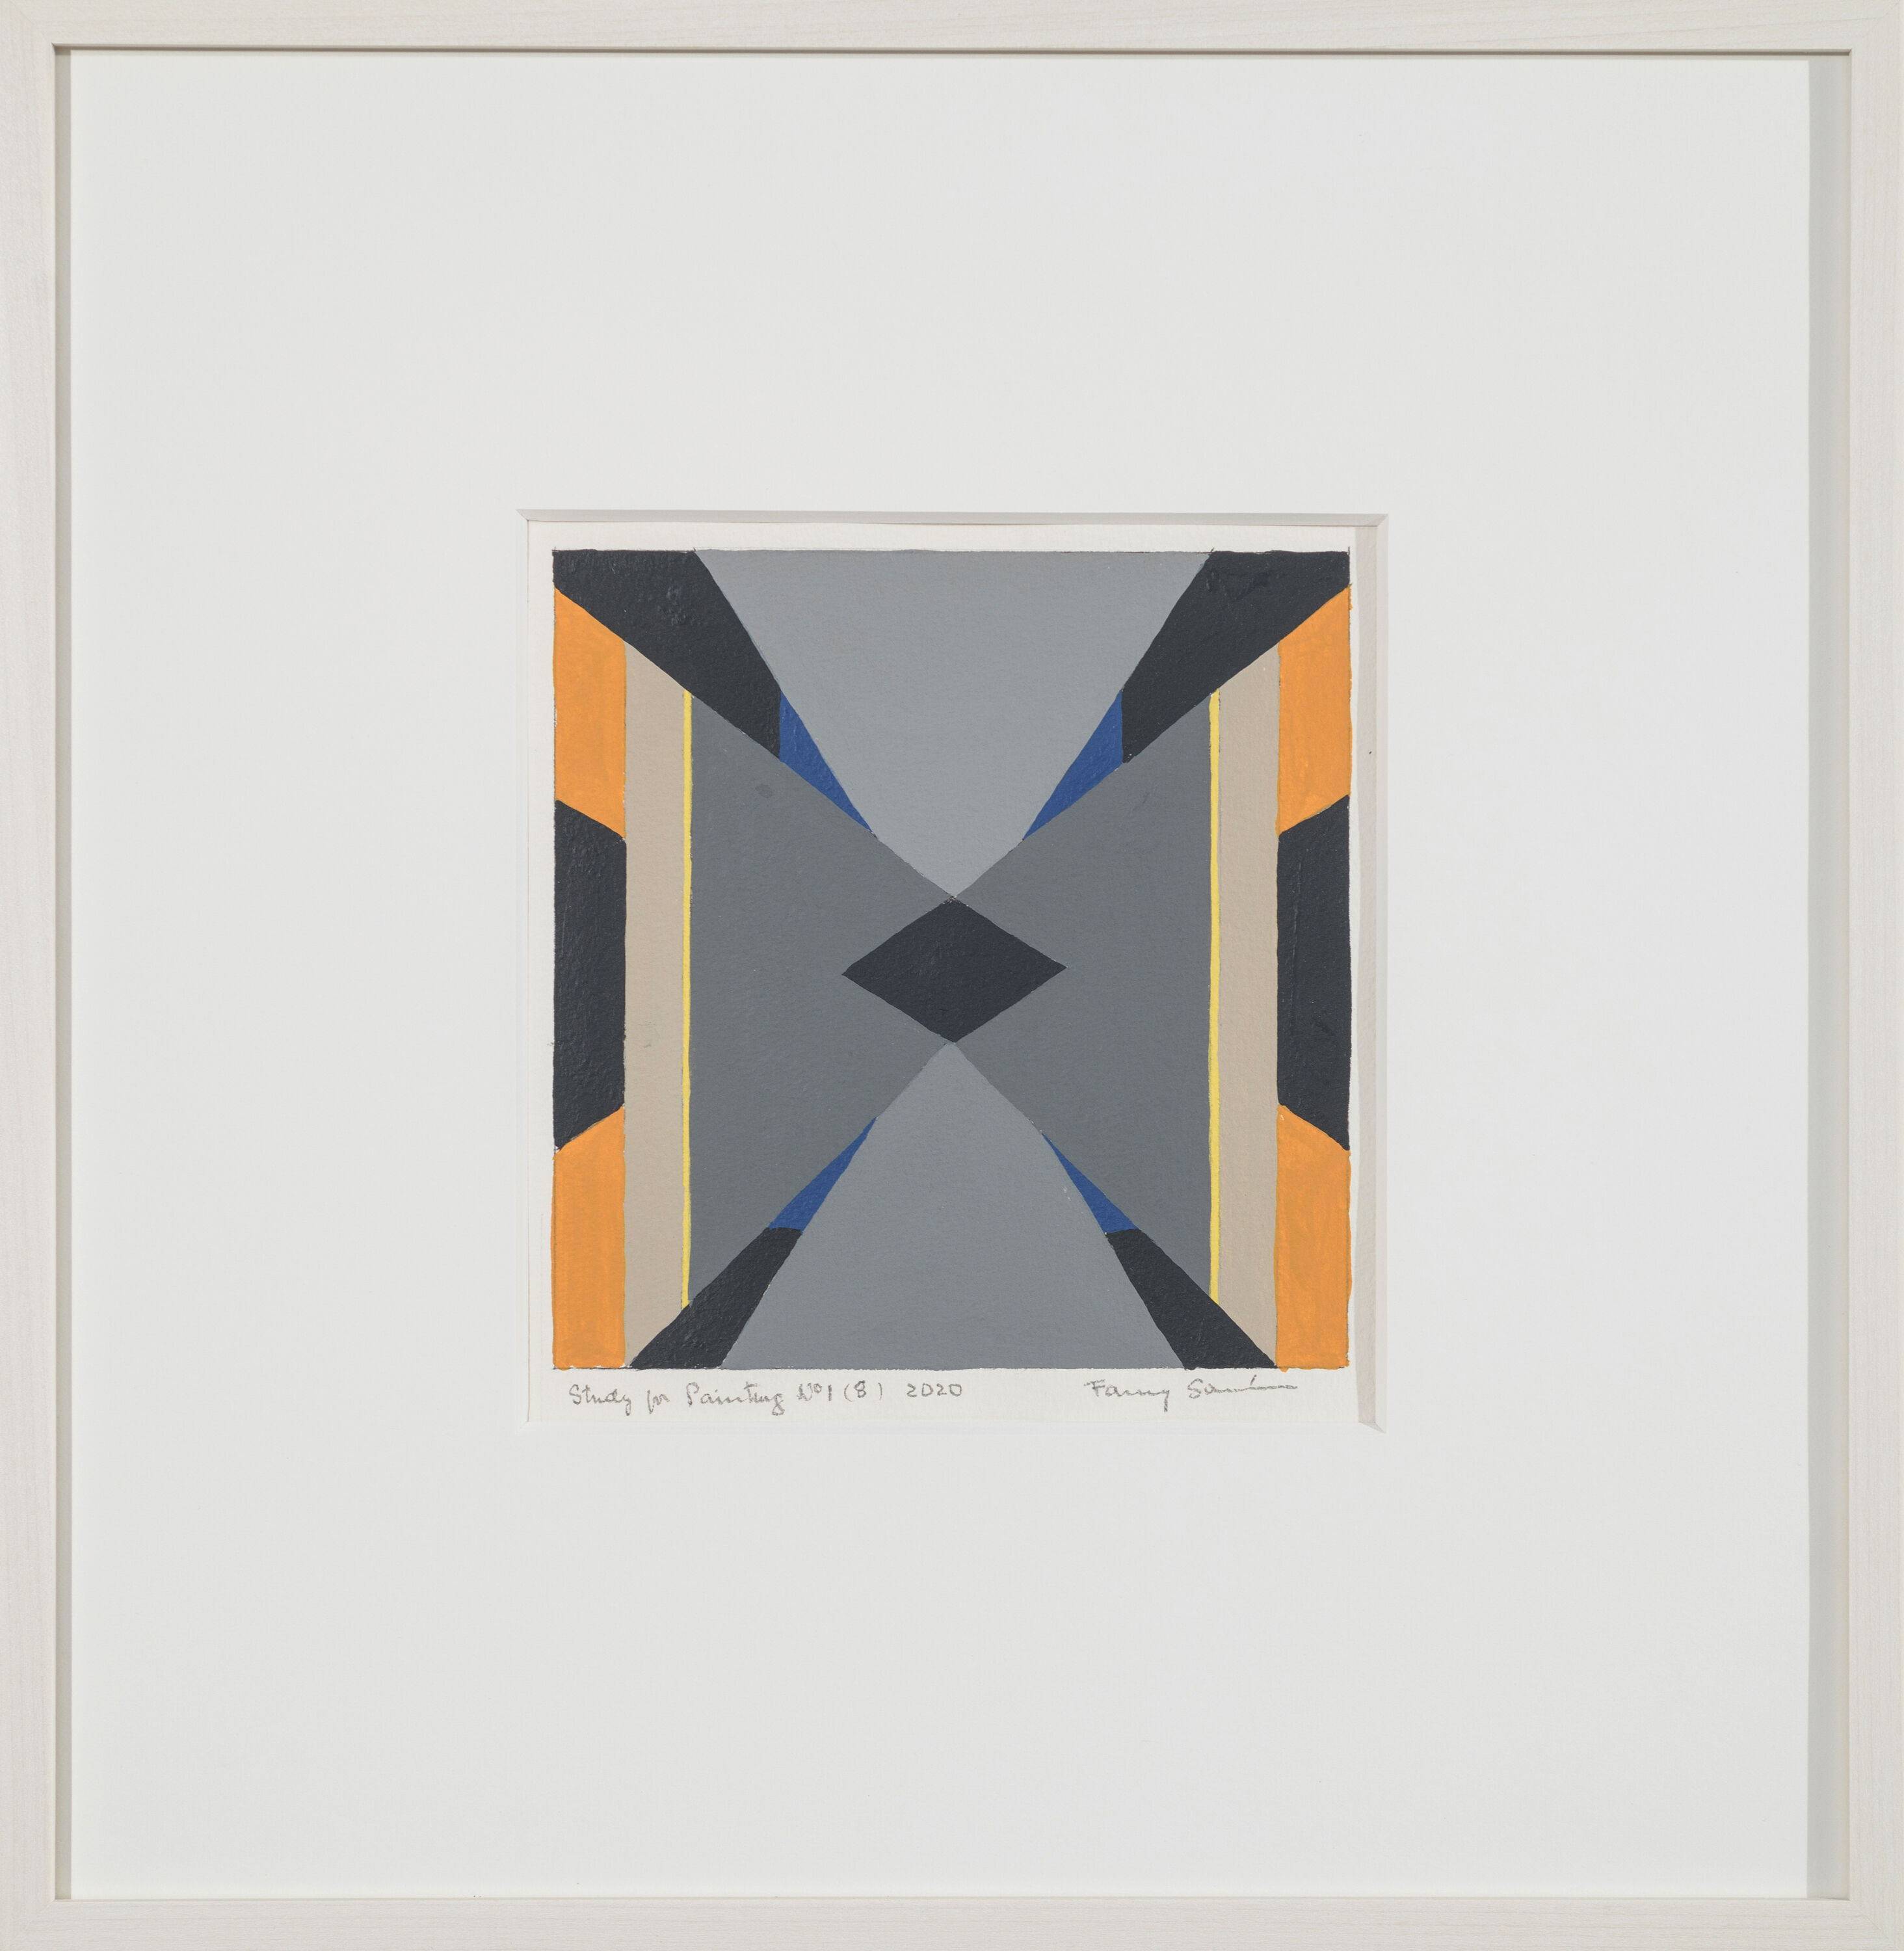 fanny sanin study for painting no 1 8 2020